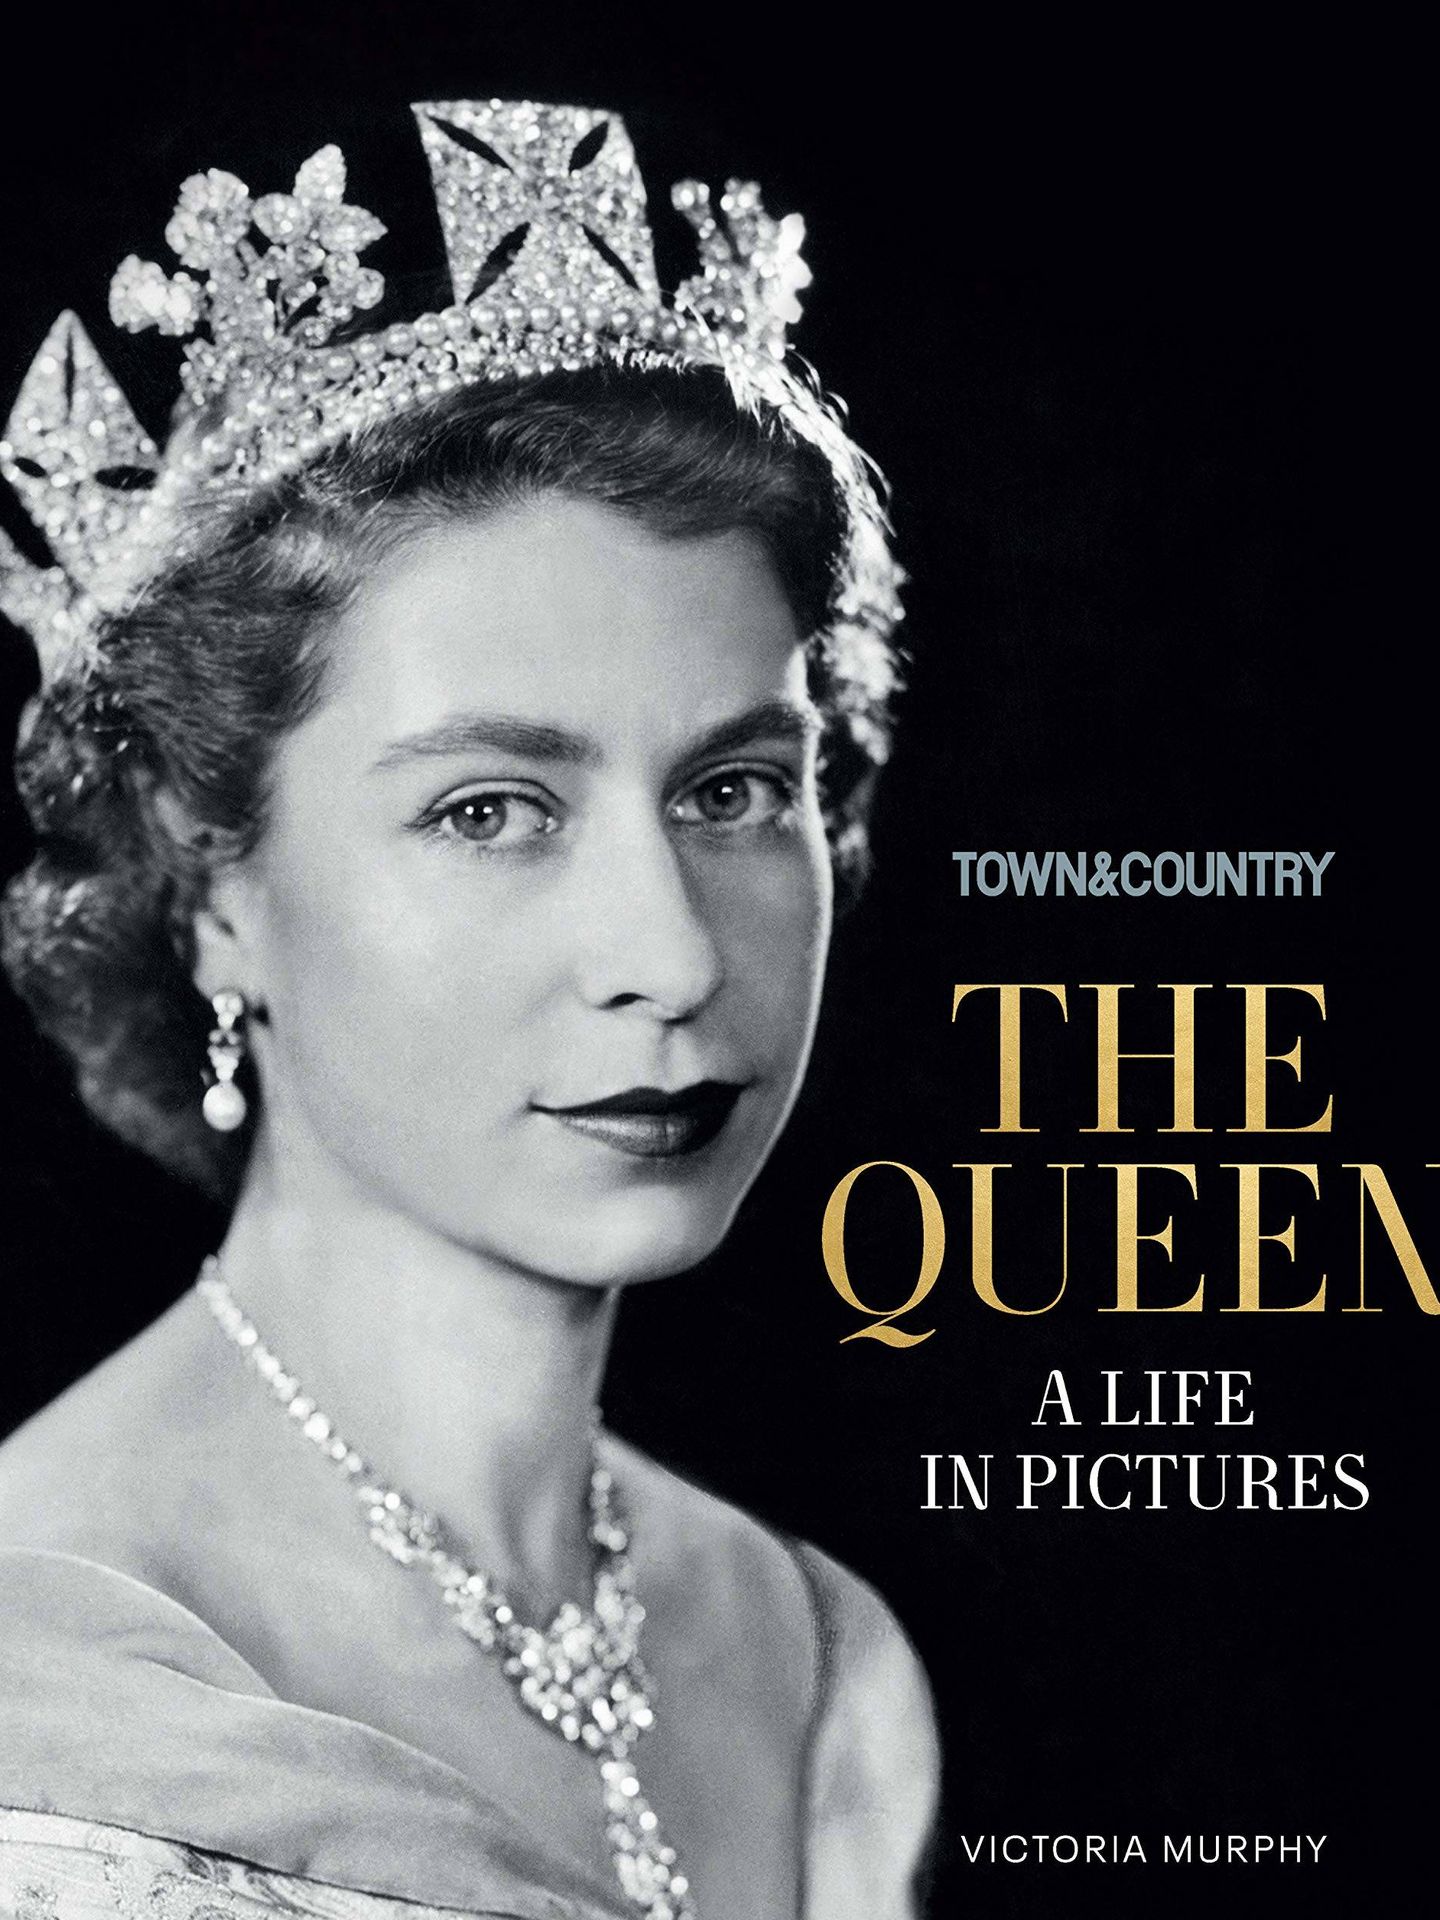  'The Queen: A Life in Pictures'. (Amazon)